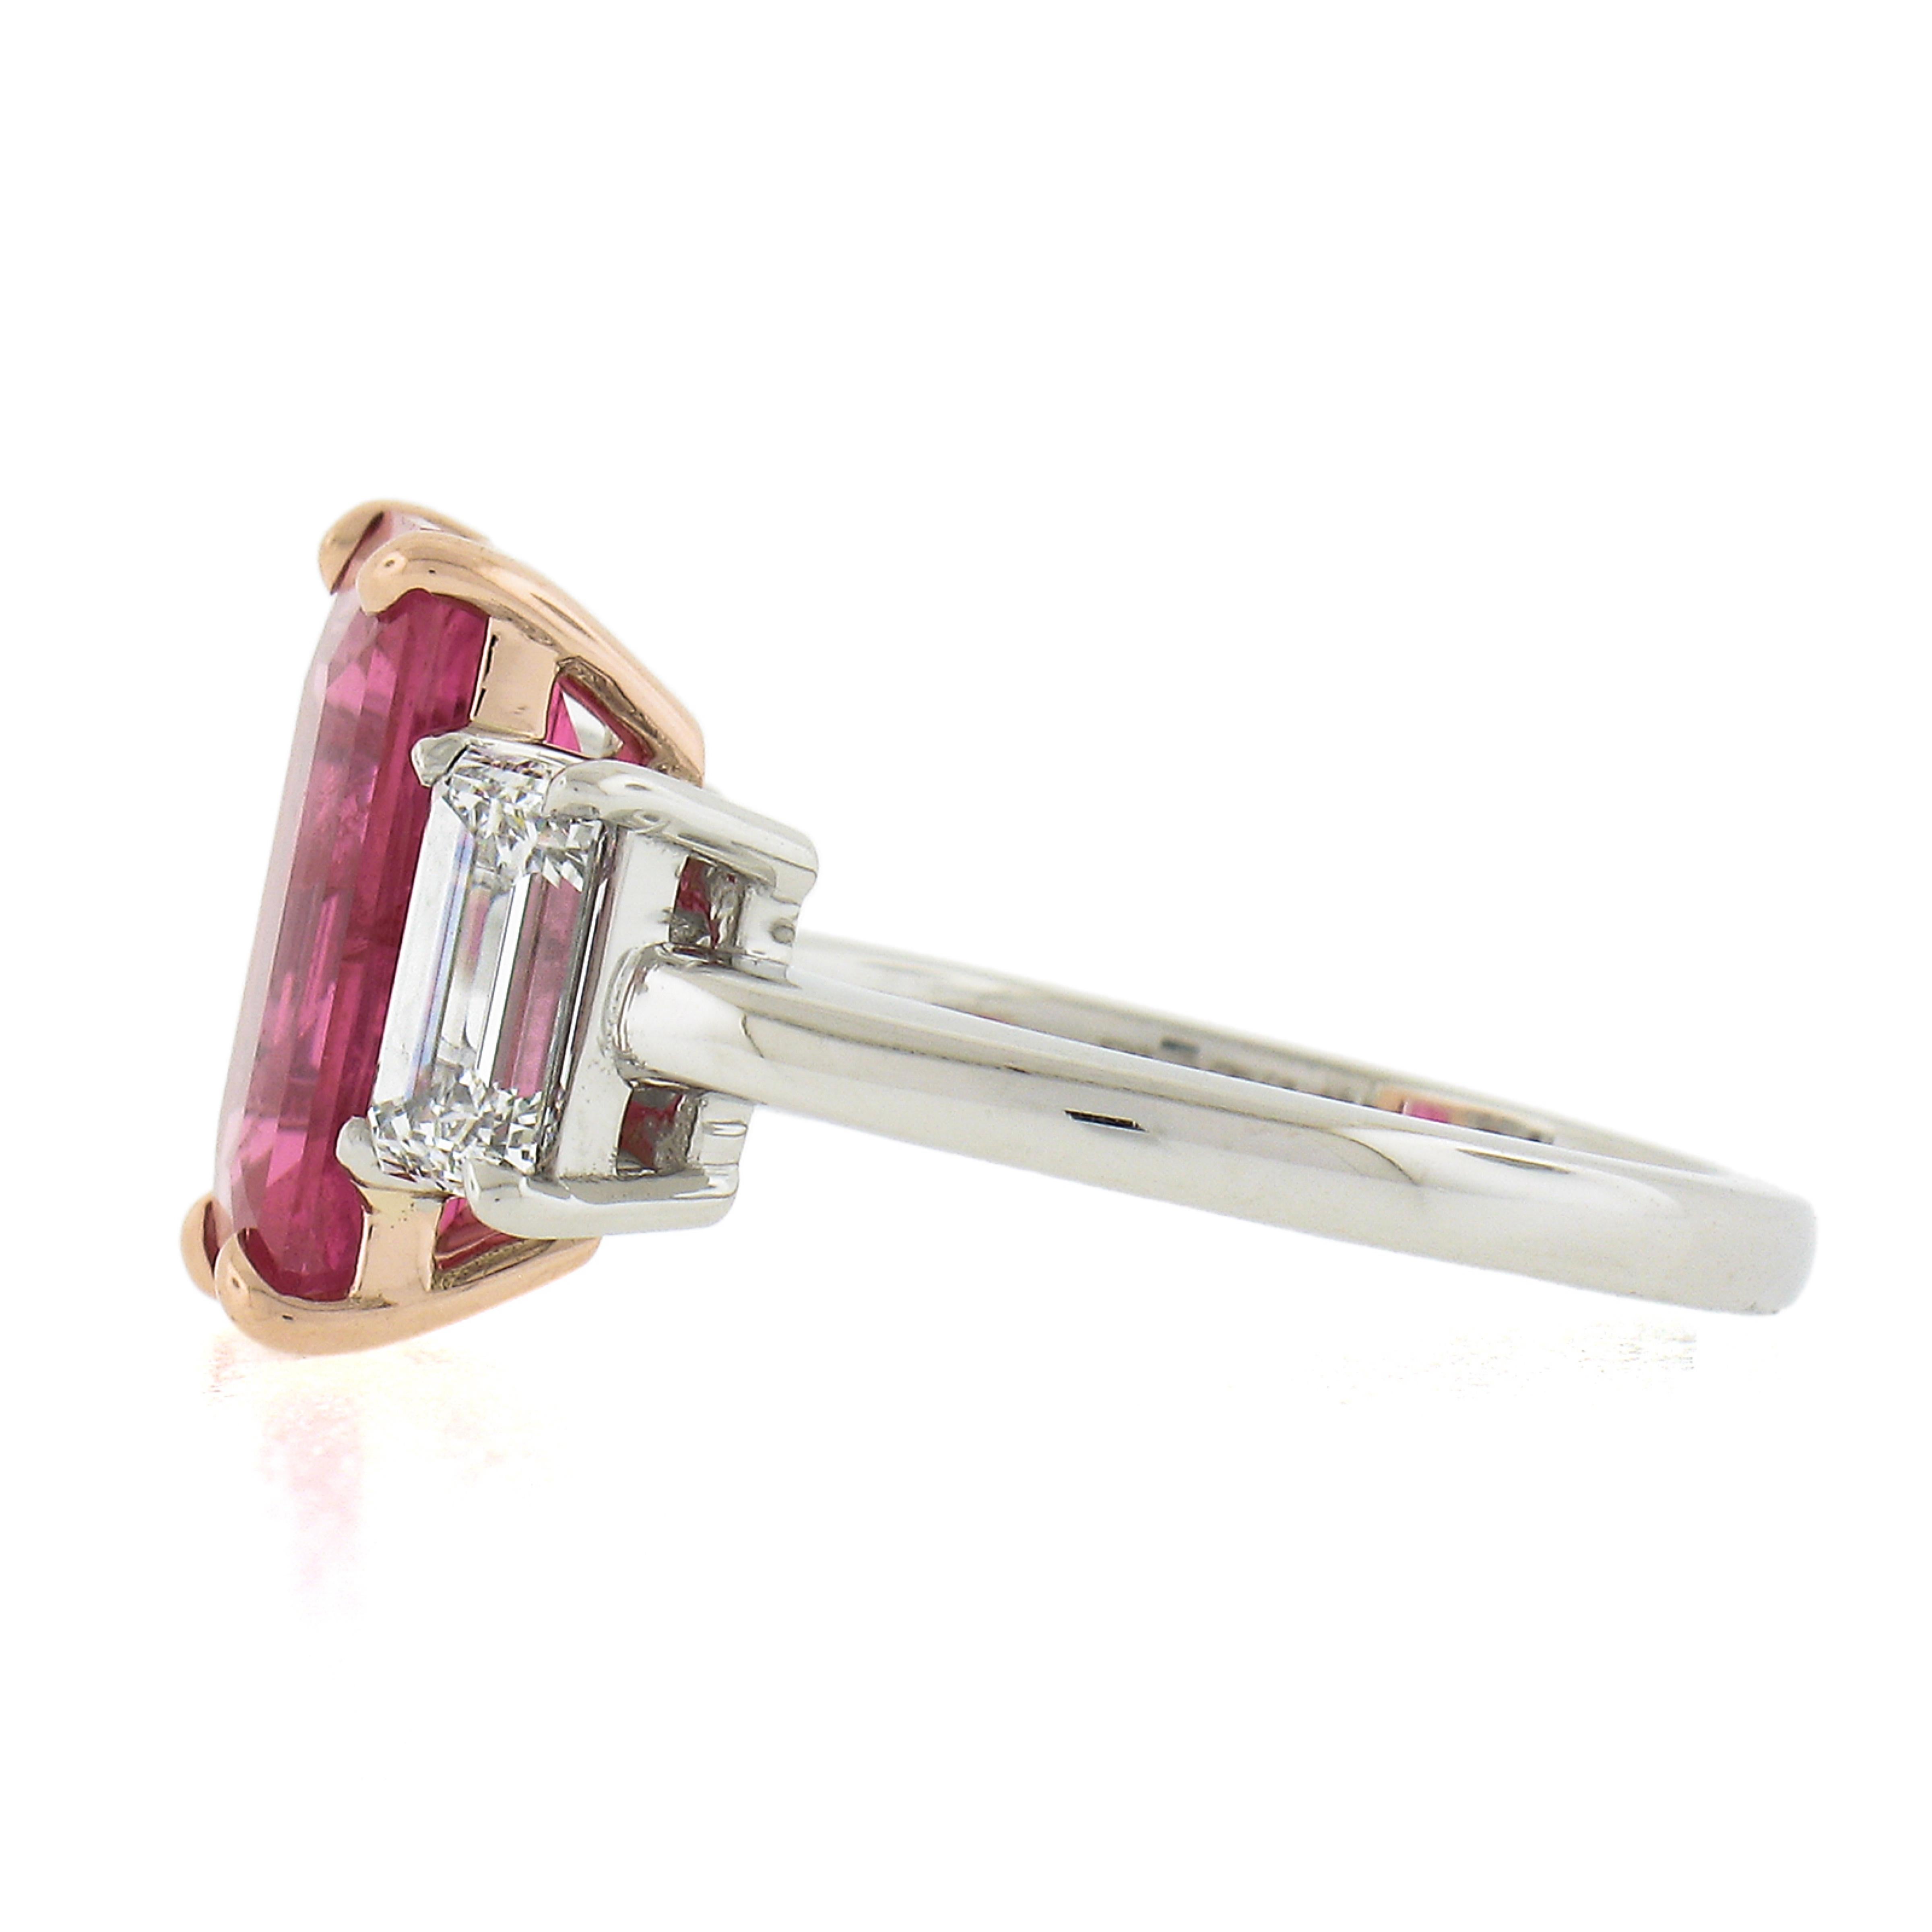 New Platinum & Rose Gold 5.41ctw Gia Pink Mahenge Spinel Diamond Cocktail Ring For Sale 1